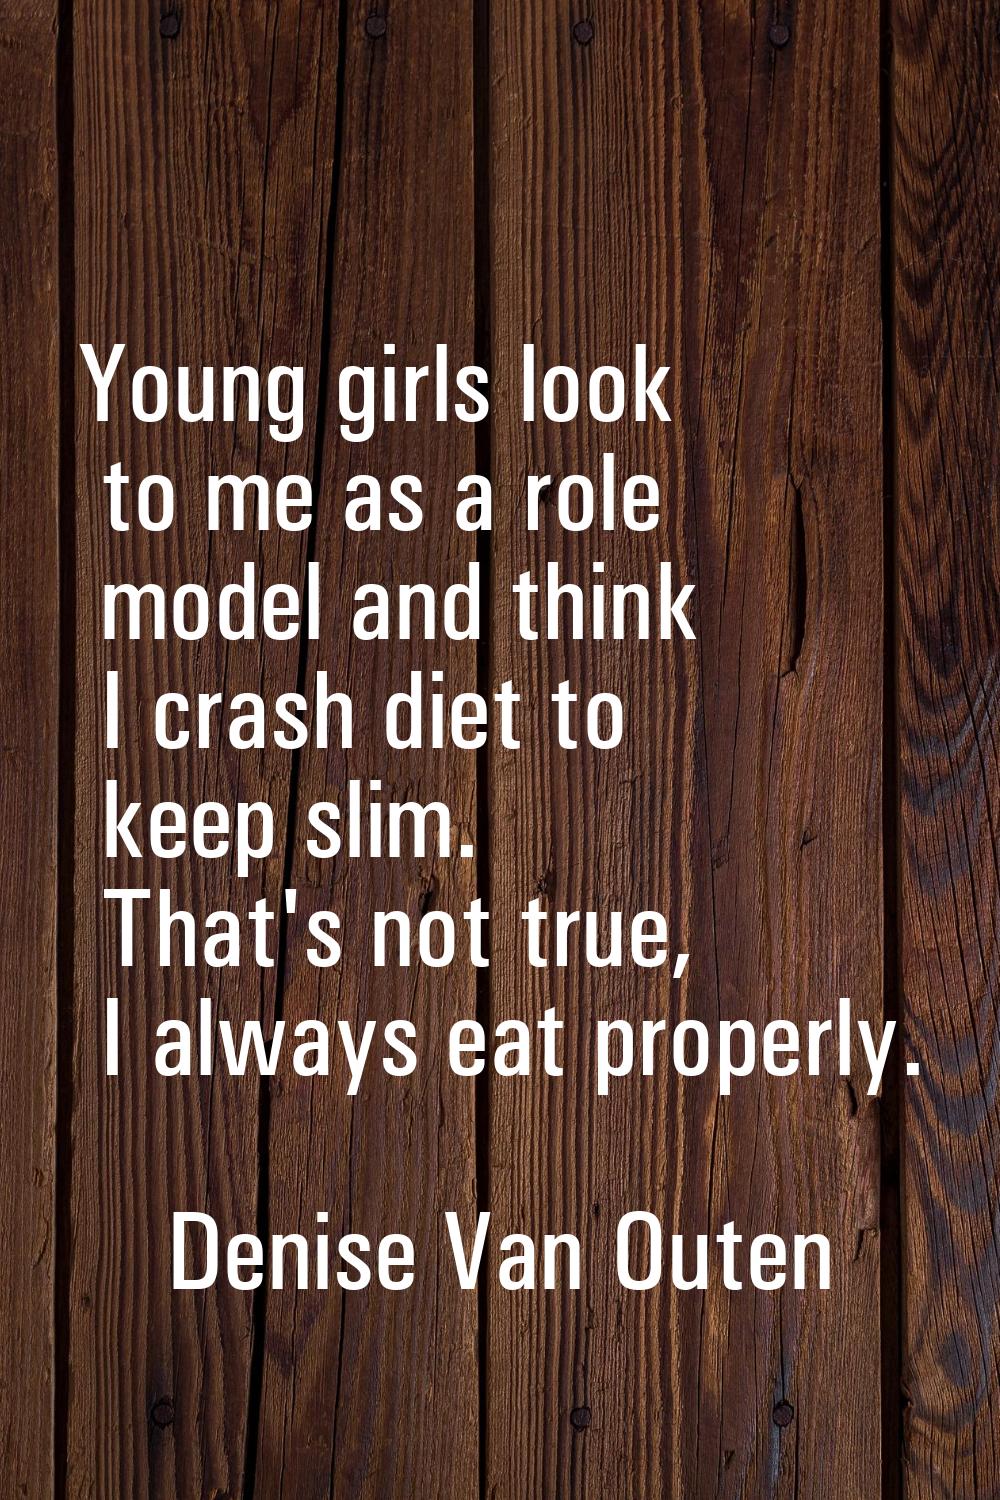 Young girls look to me as a role model and think I crash diet to keep slim. That's not true, I alwa